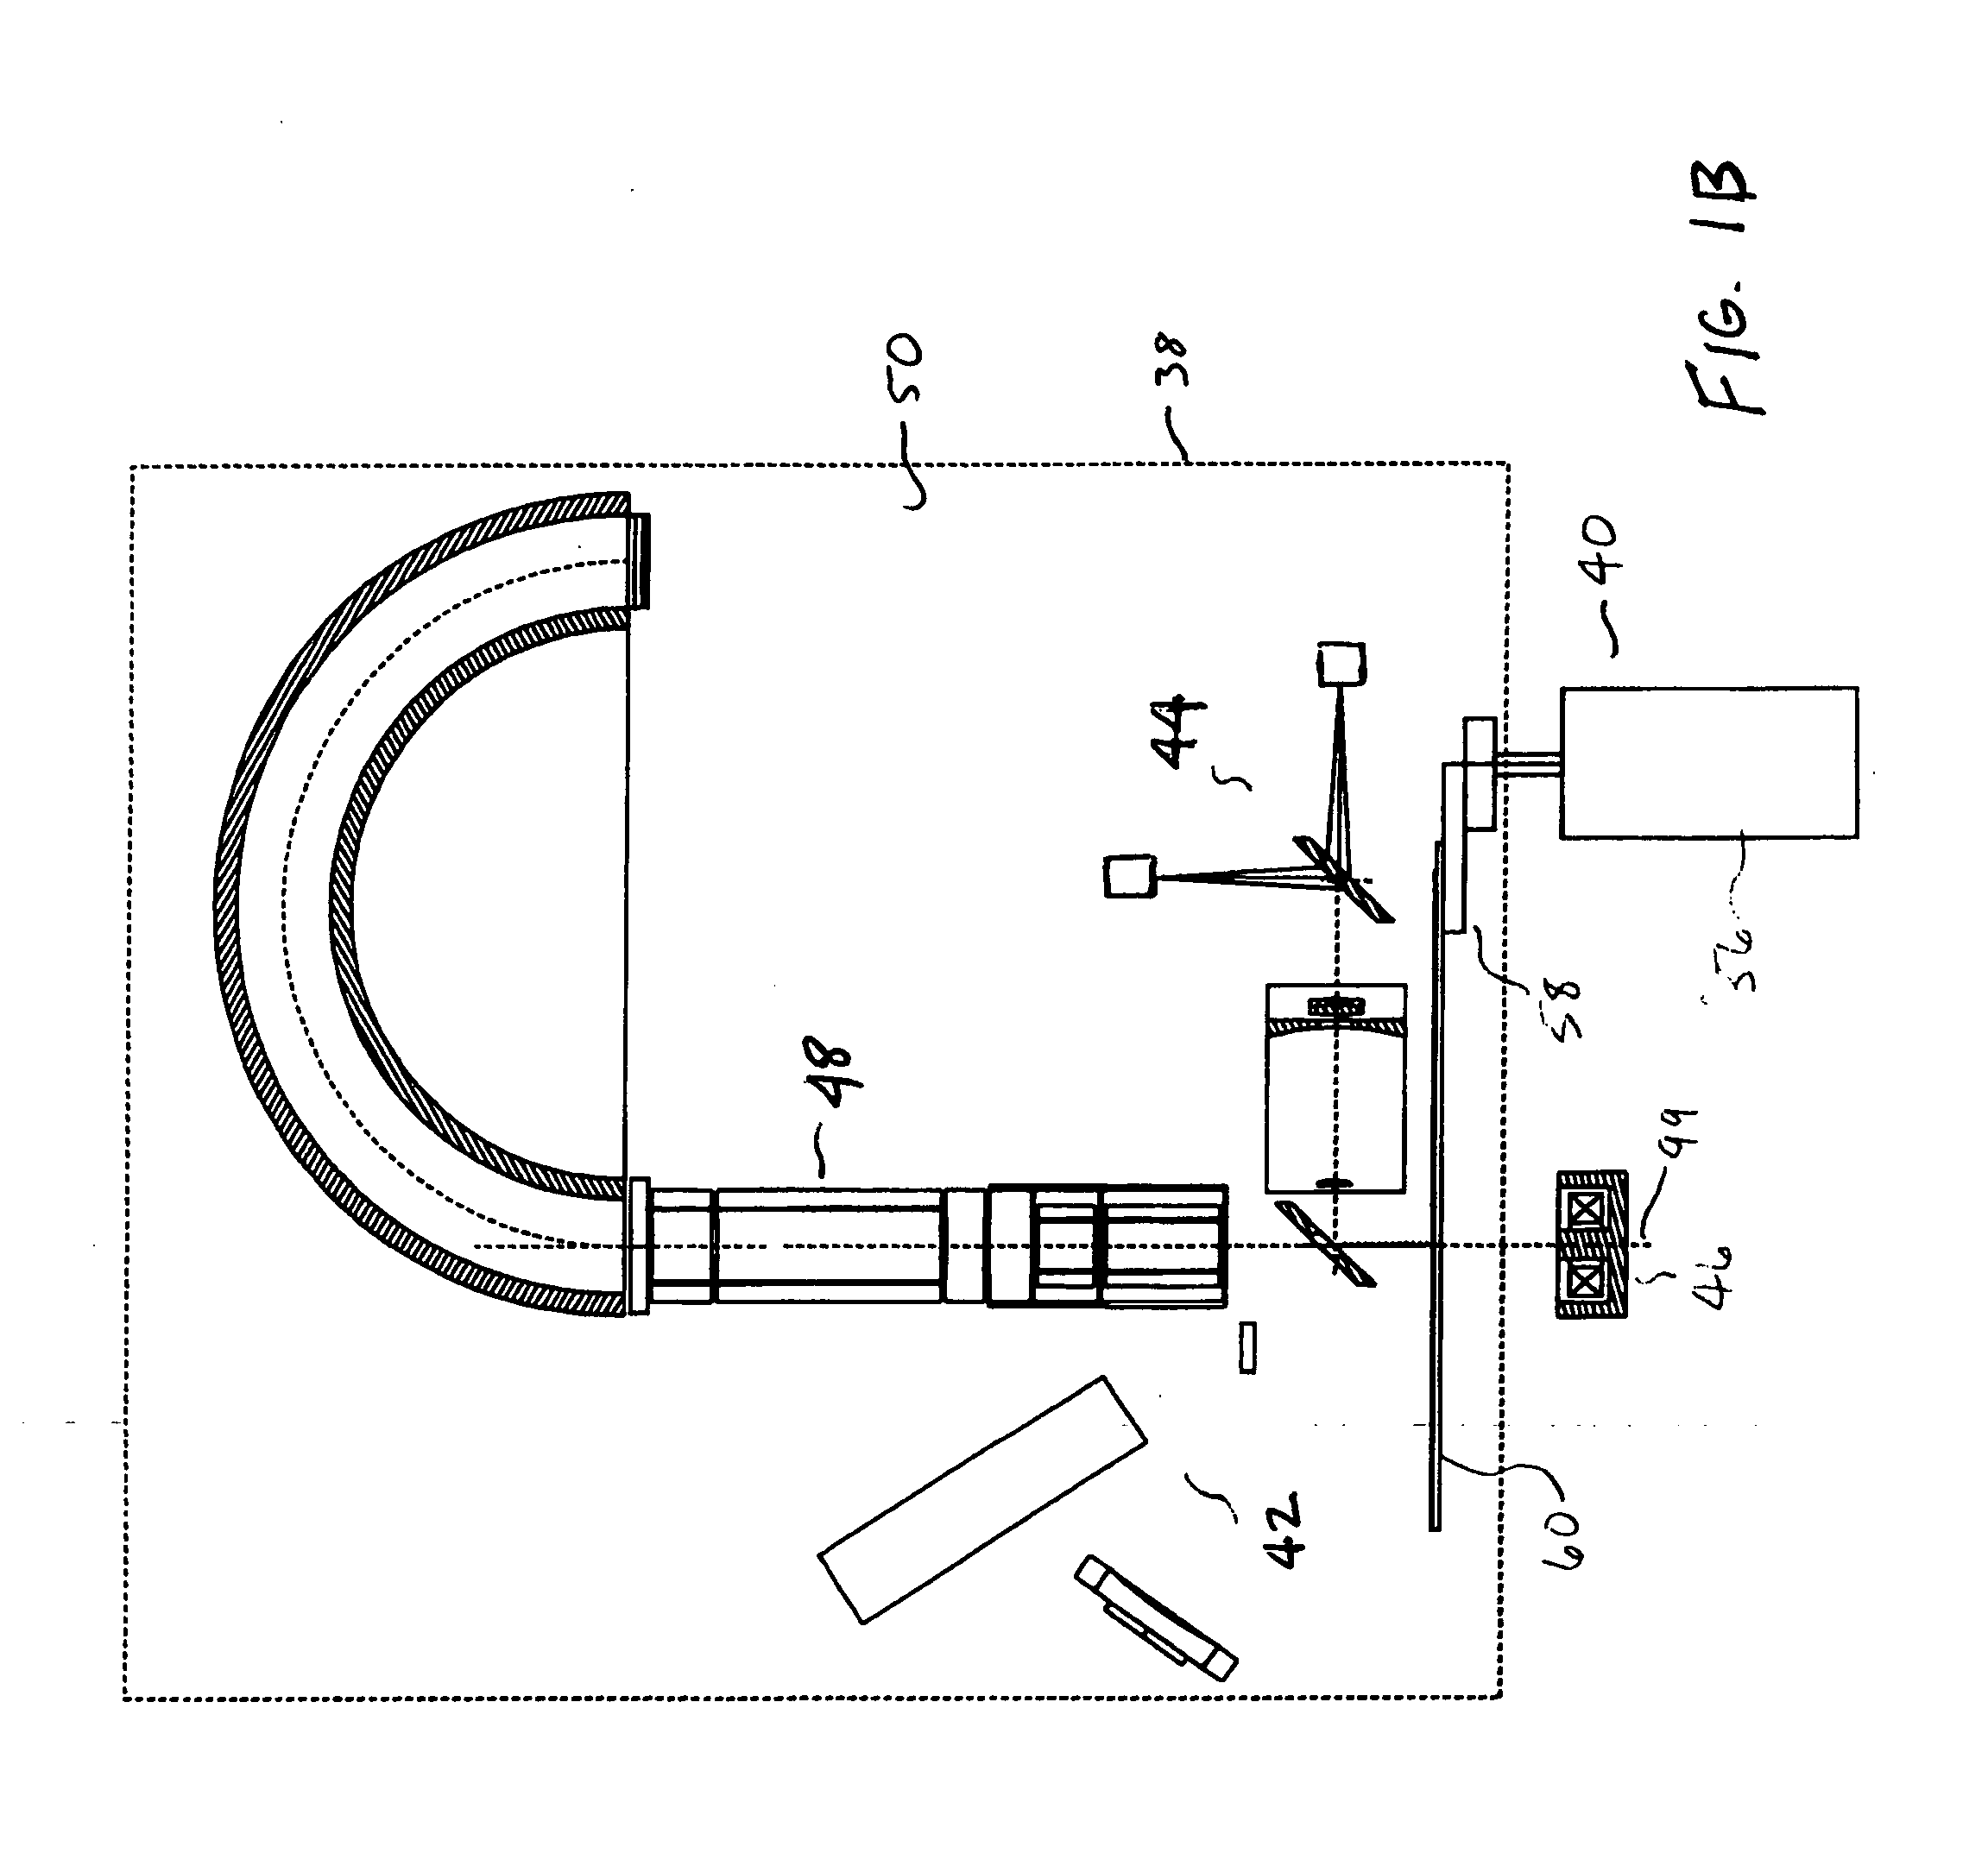 Photoelectron spectroscopy apparatus and method of use